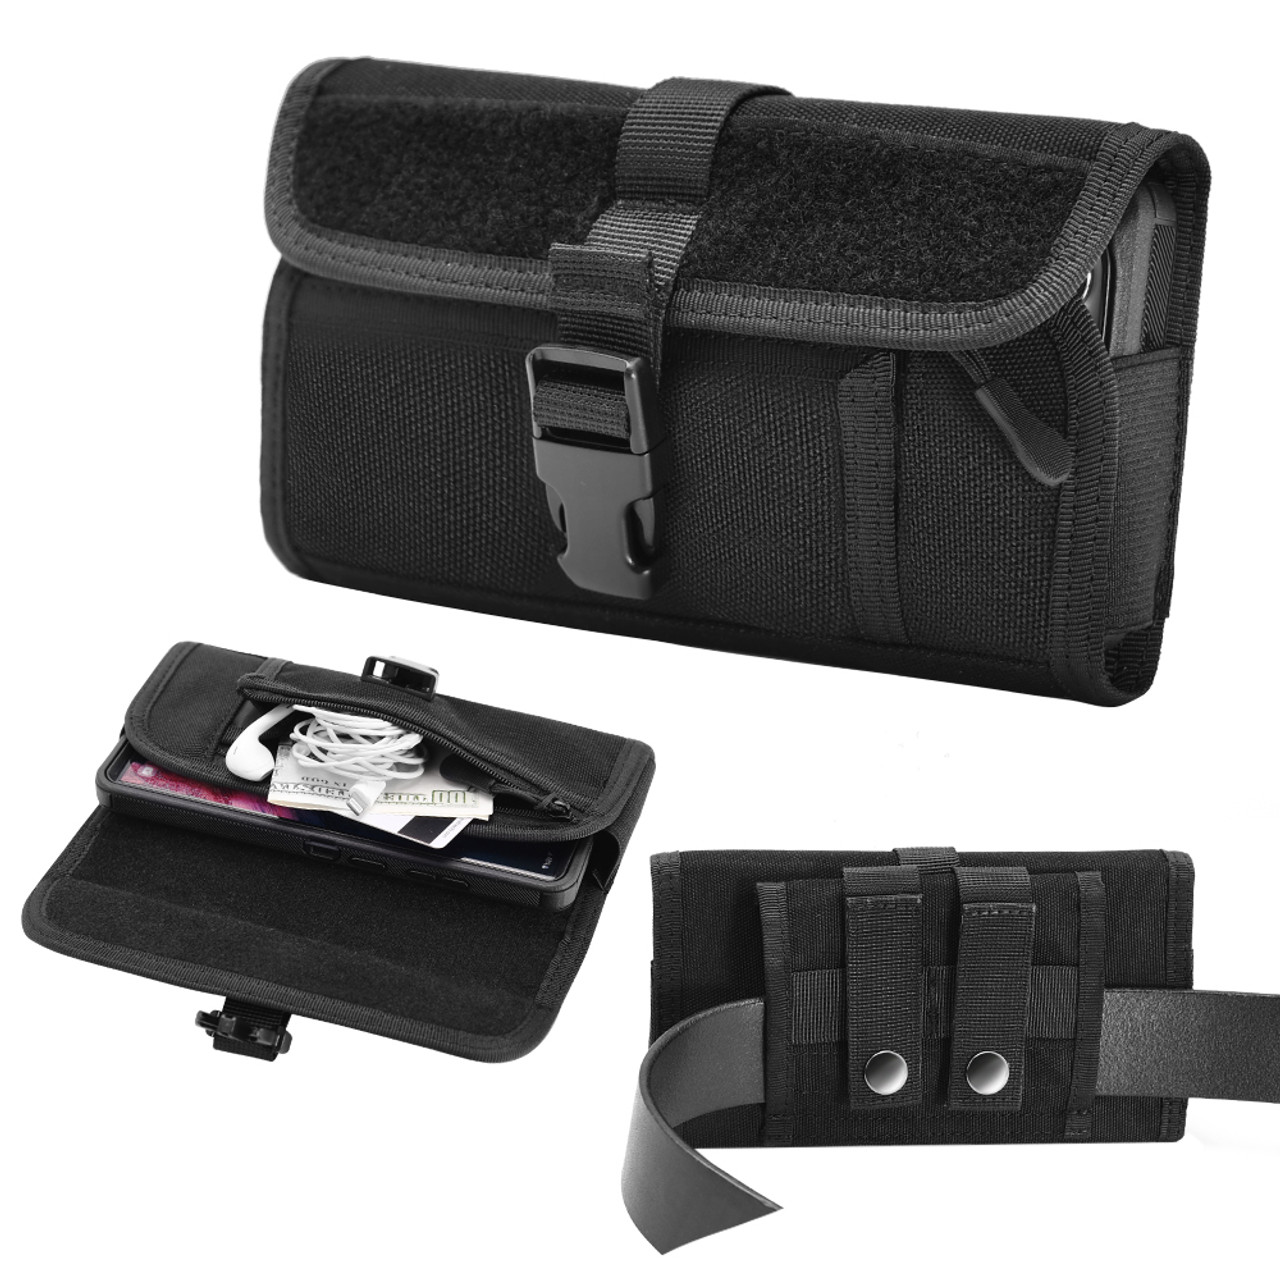 Apple Soft Nylon Carrying Case and Belt Clip for iPod 4th